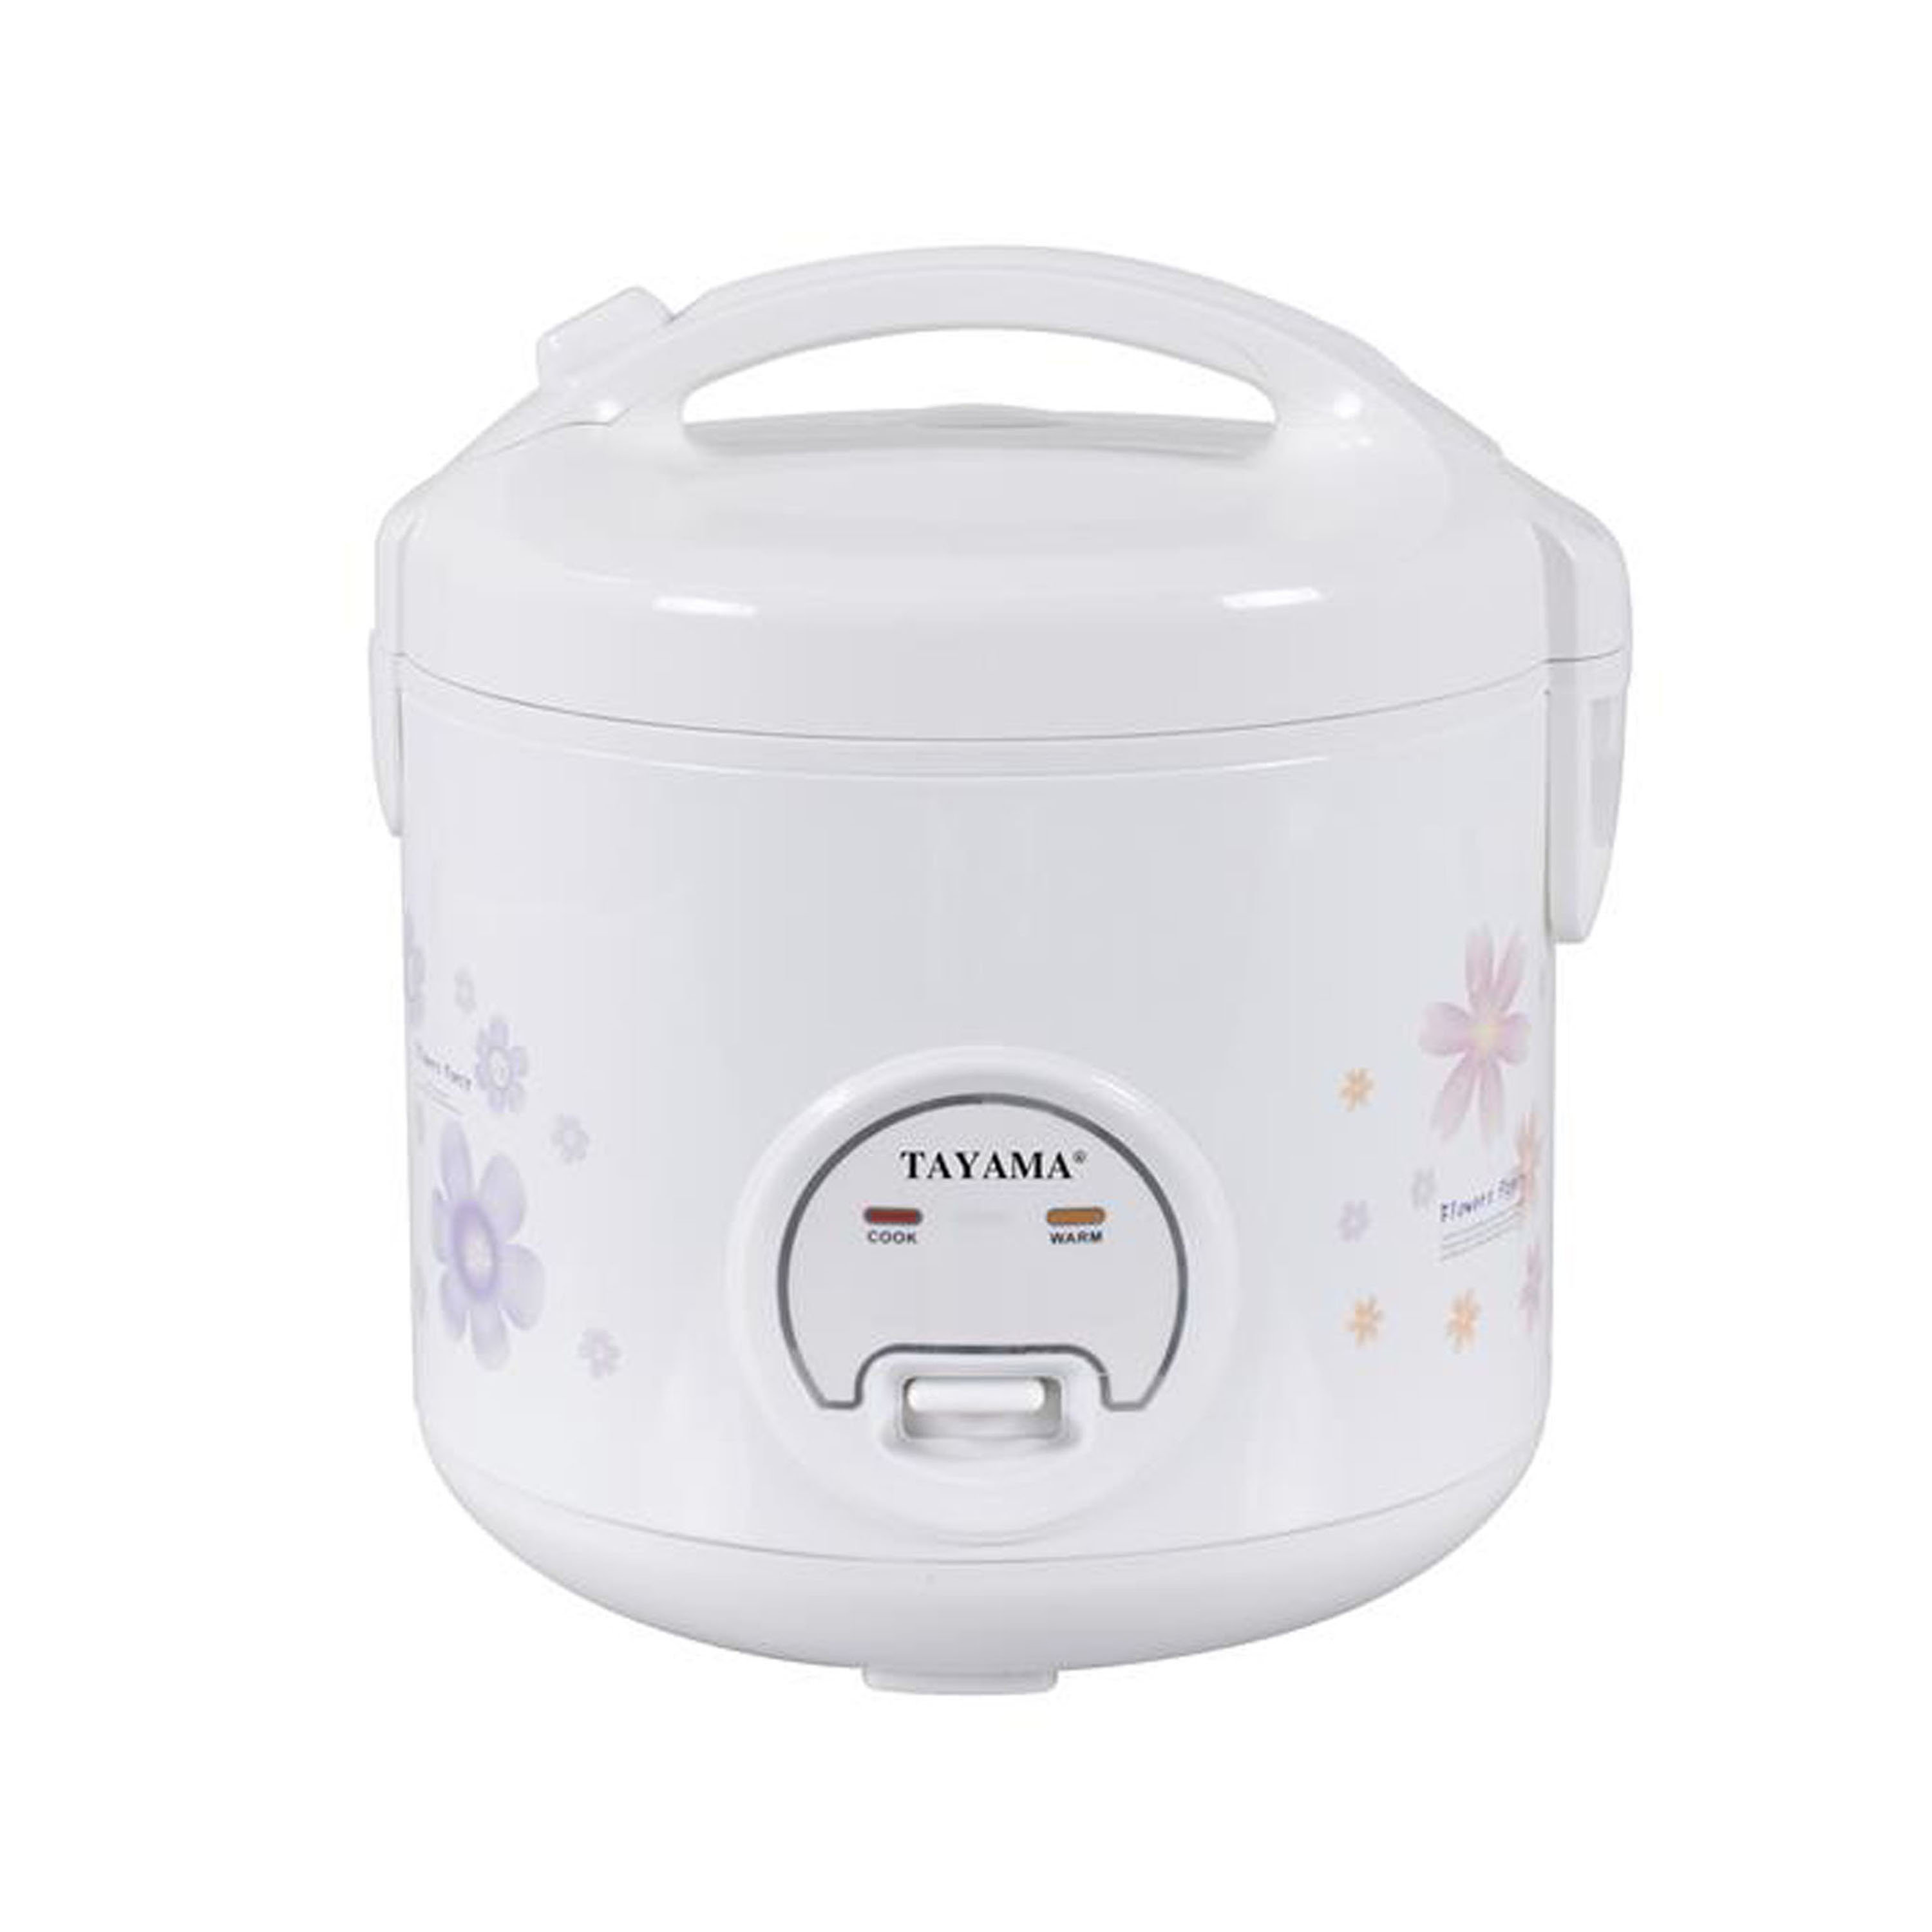  CHACEEF Mini Rice Cooker 2-Cups Uncooked, 1.2L Small Rice Cooker  with Non-stick Pot, Mini Rice Maker with One Touch & Keep Warm Function,  Food Steamer, Green: Home & Kitchen